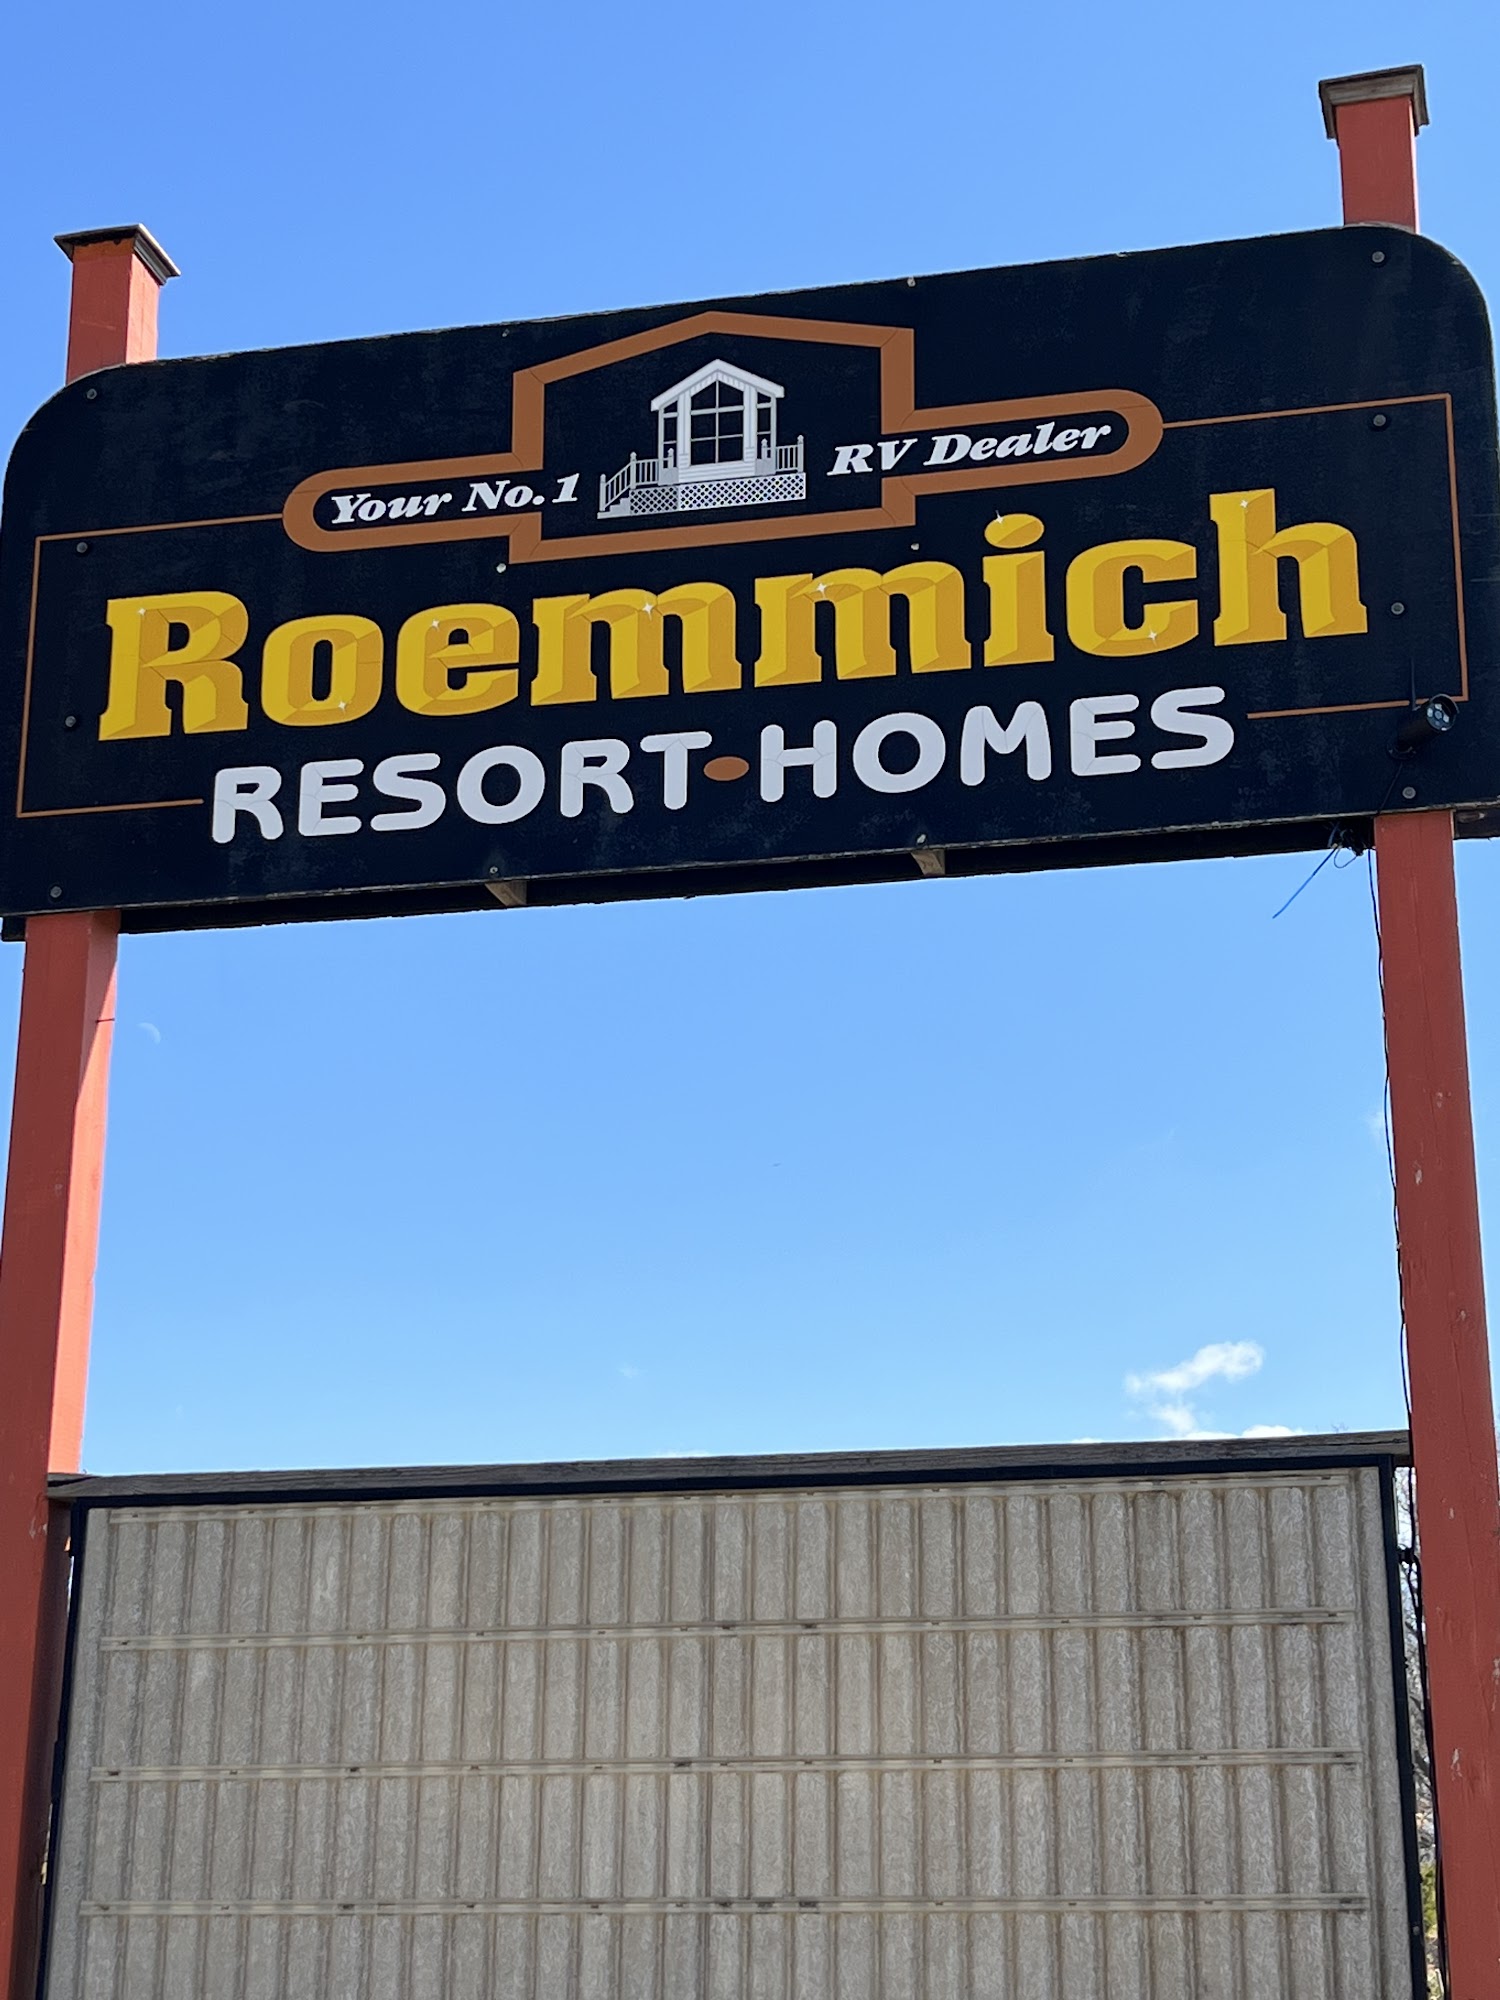 Roemmich Resort Homes 1867 Tower Rd, Sublette Illinois 61367